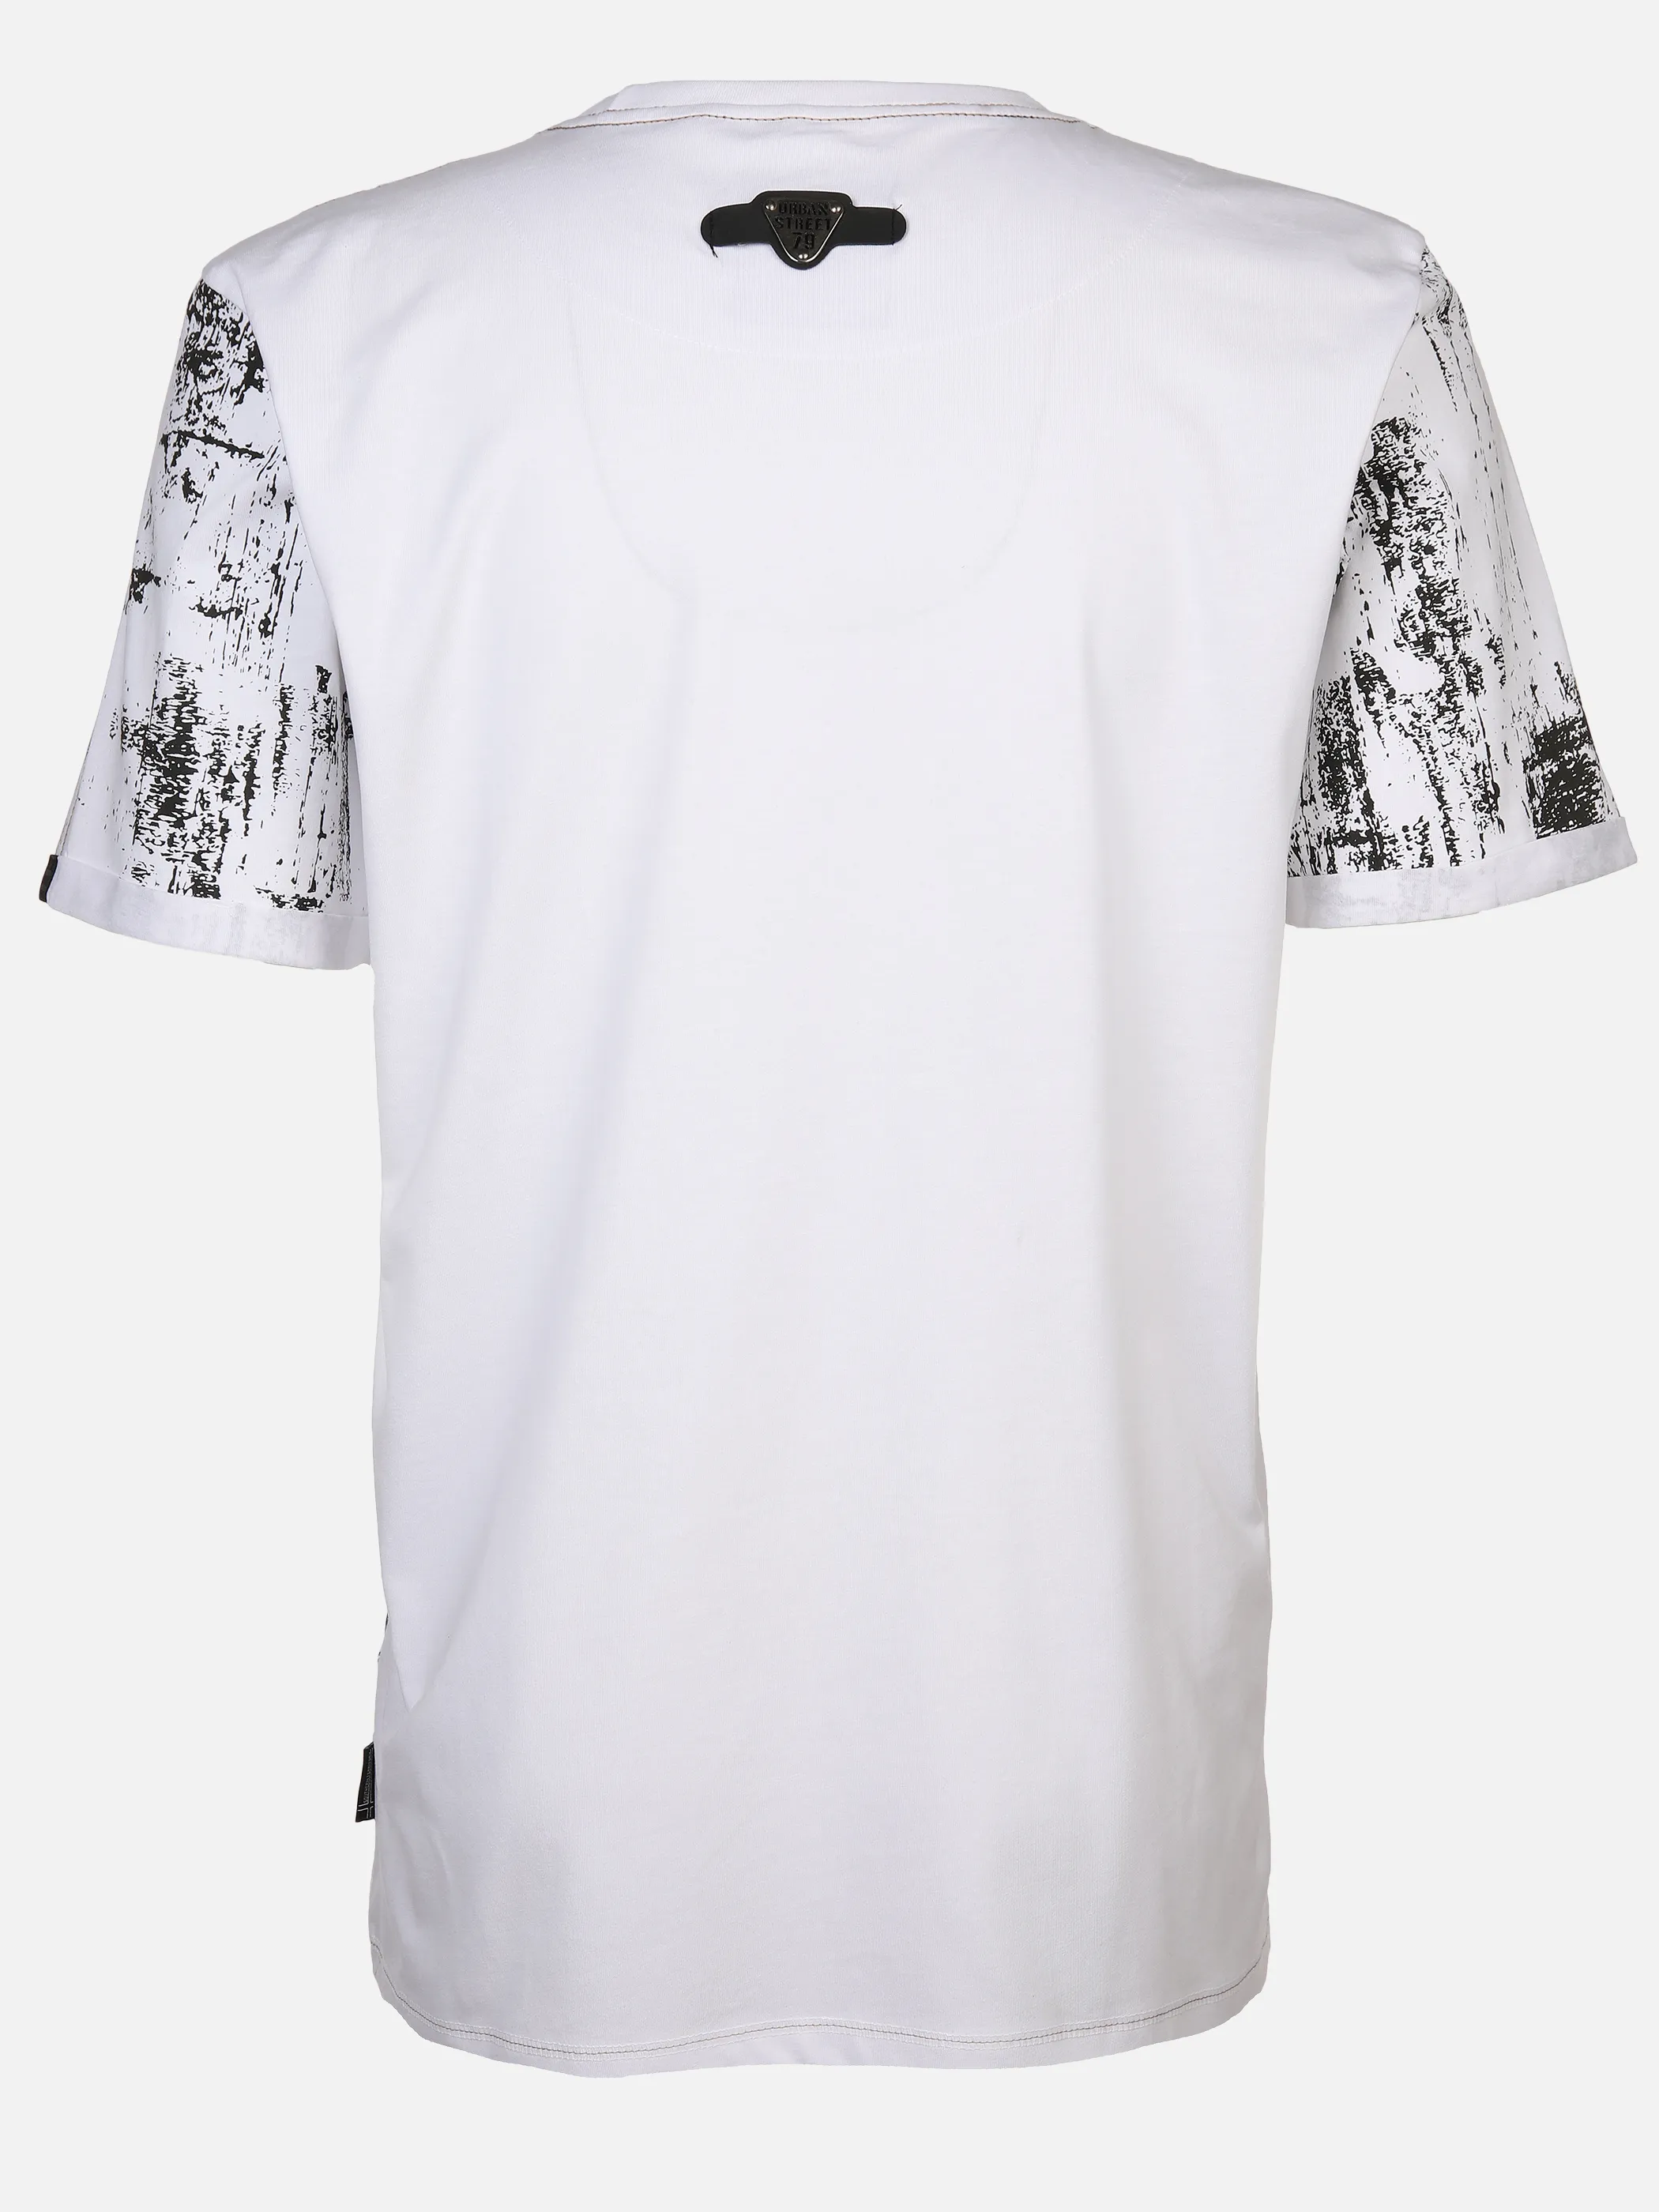 Southern Territory He- T-Shirt 1/2 Arm allover Weiß 893221 WHITE 2